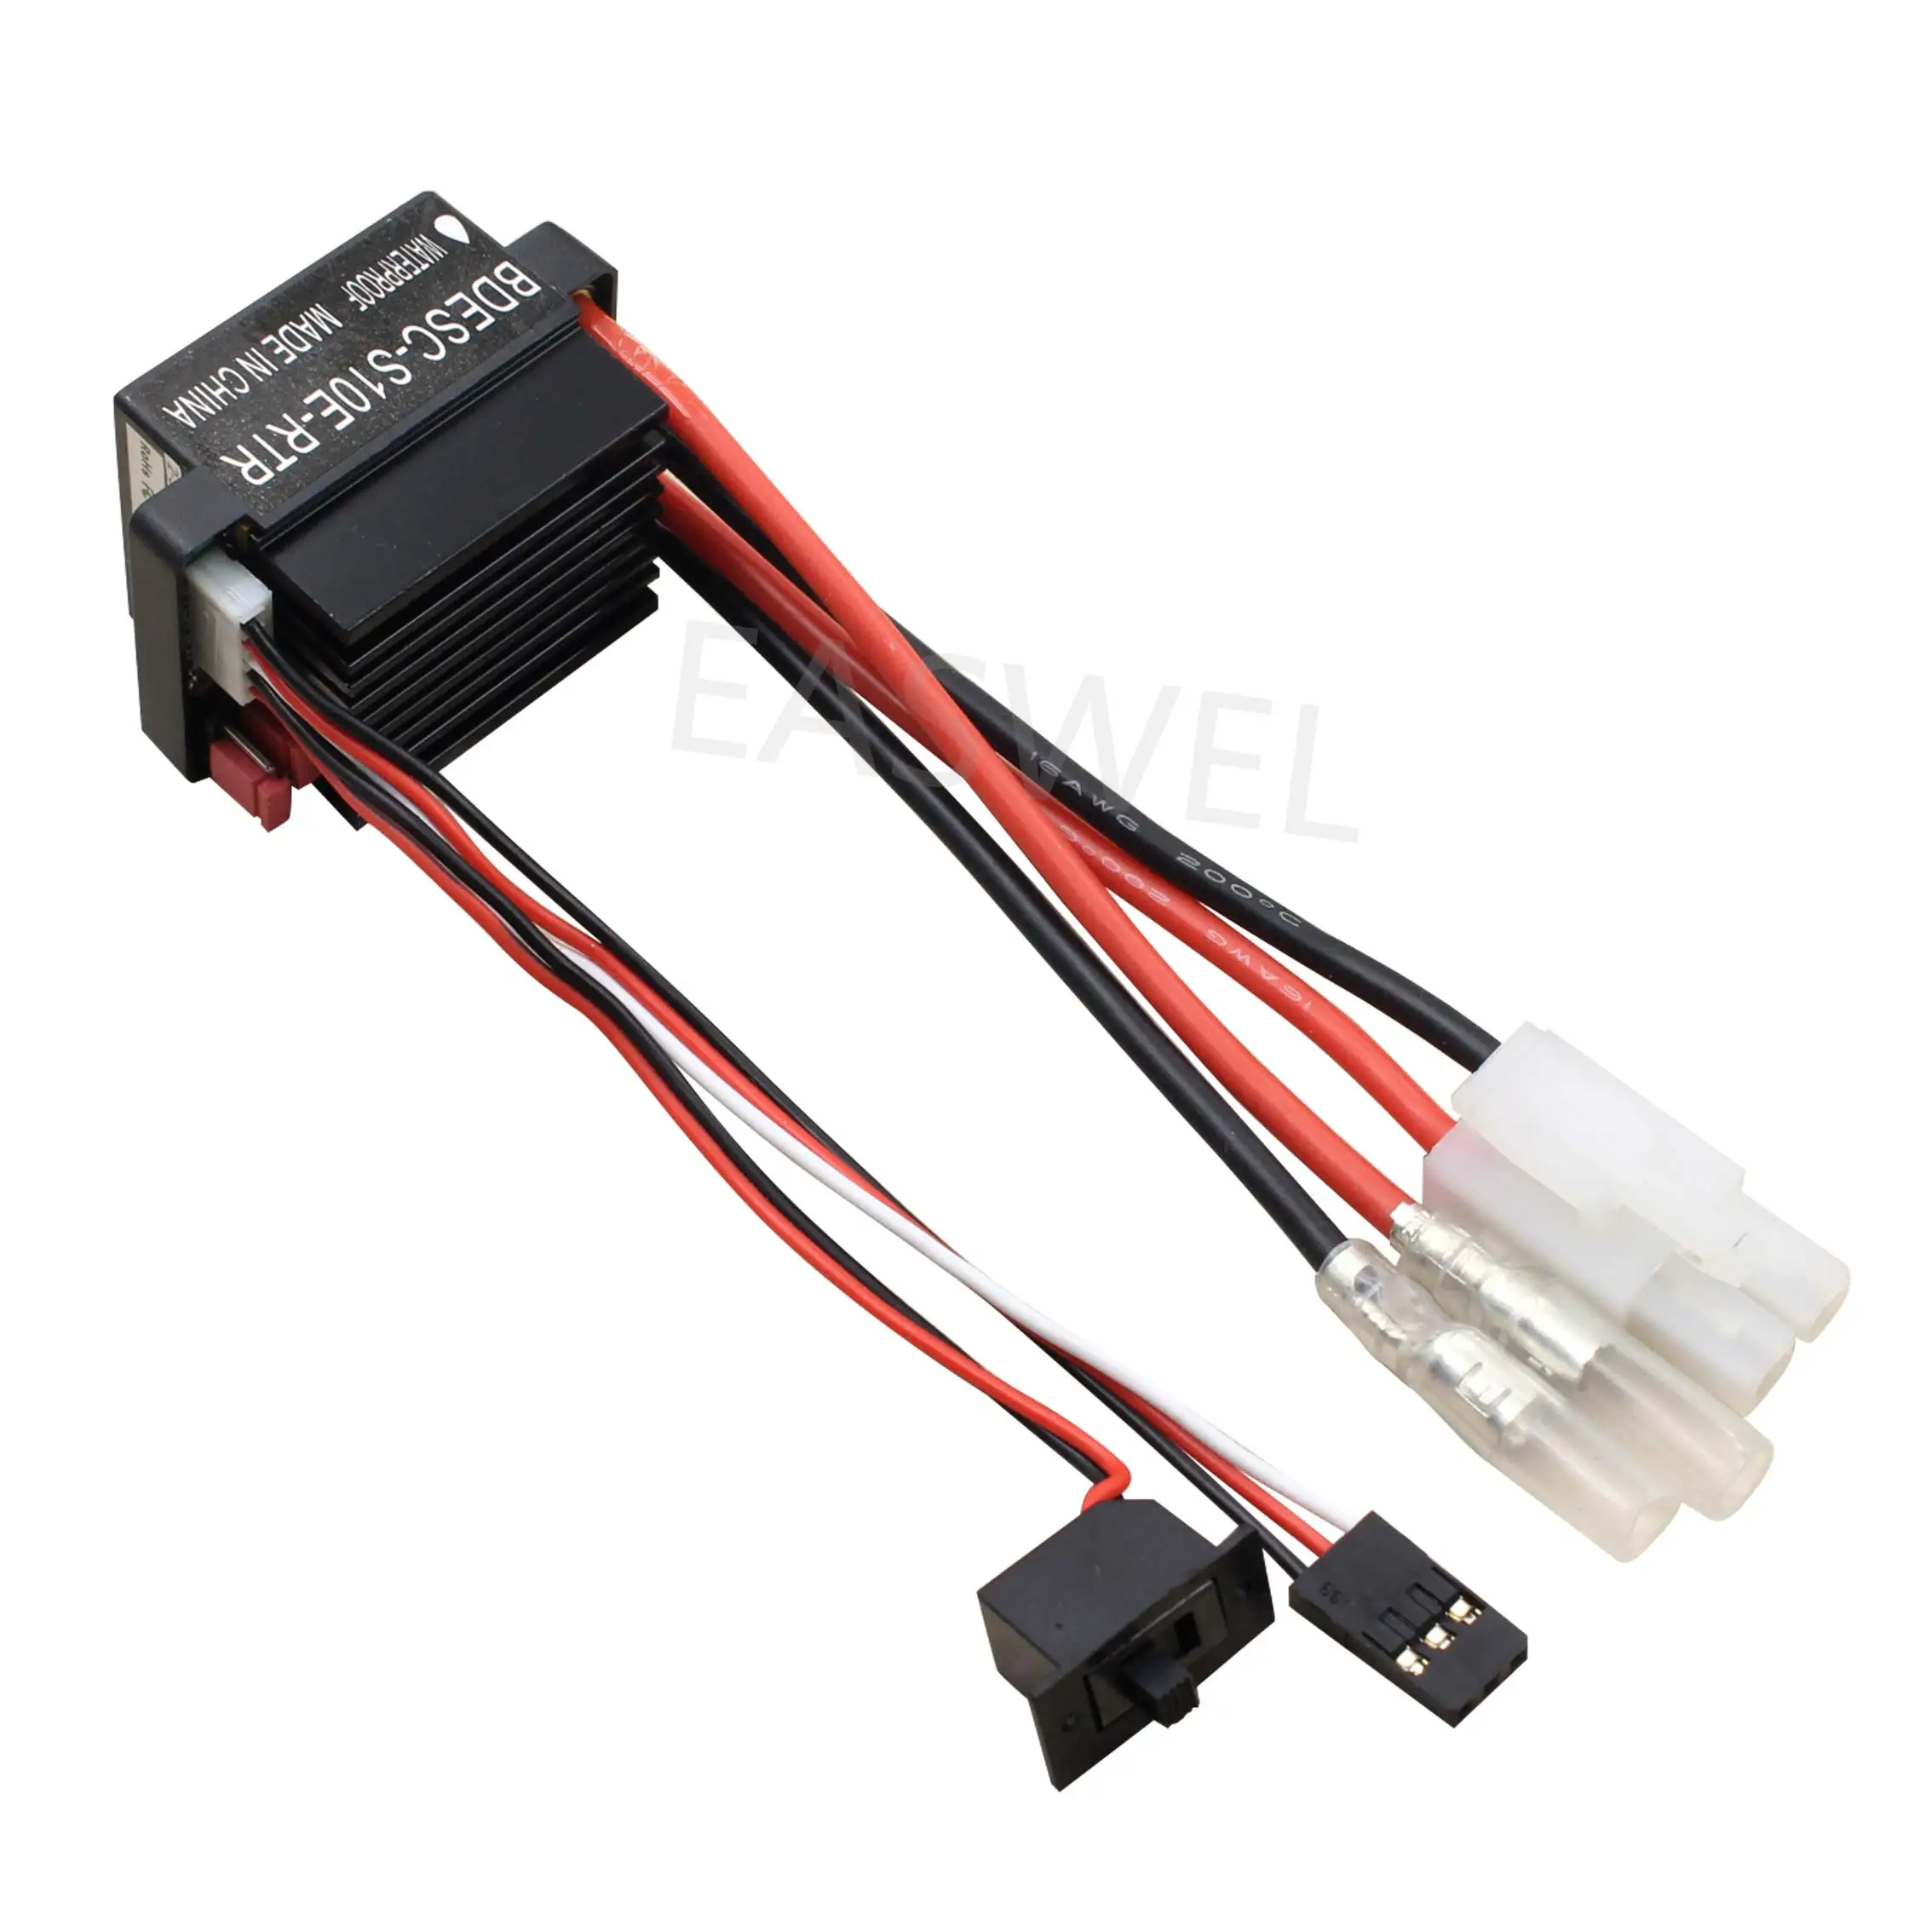 320A Brushed ESC Electronic Speed Controller Waterproof For RC Car Boat Motor